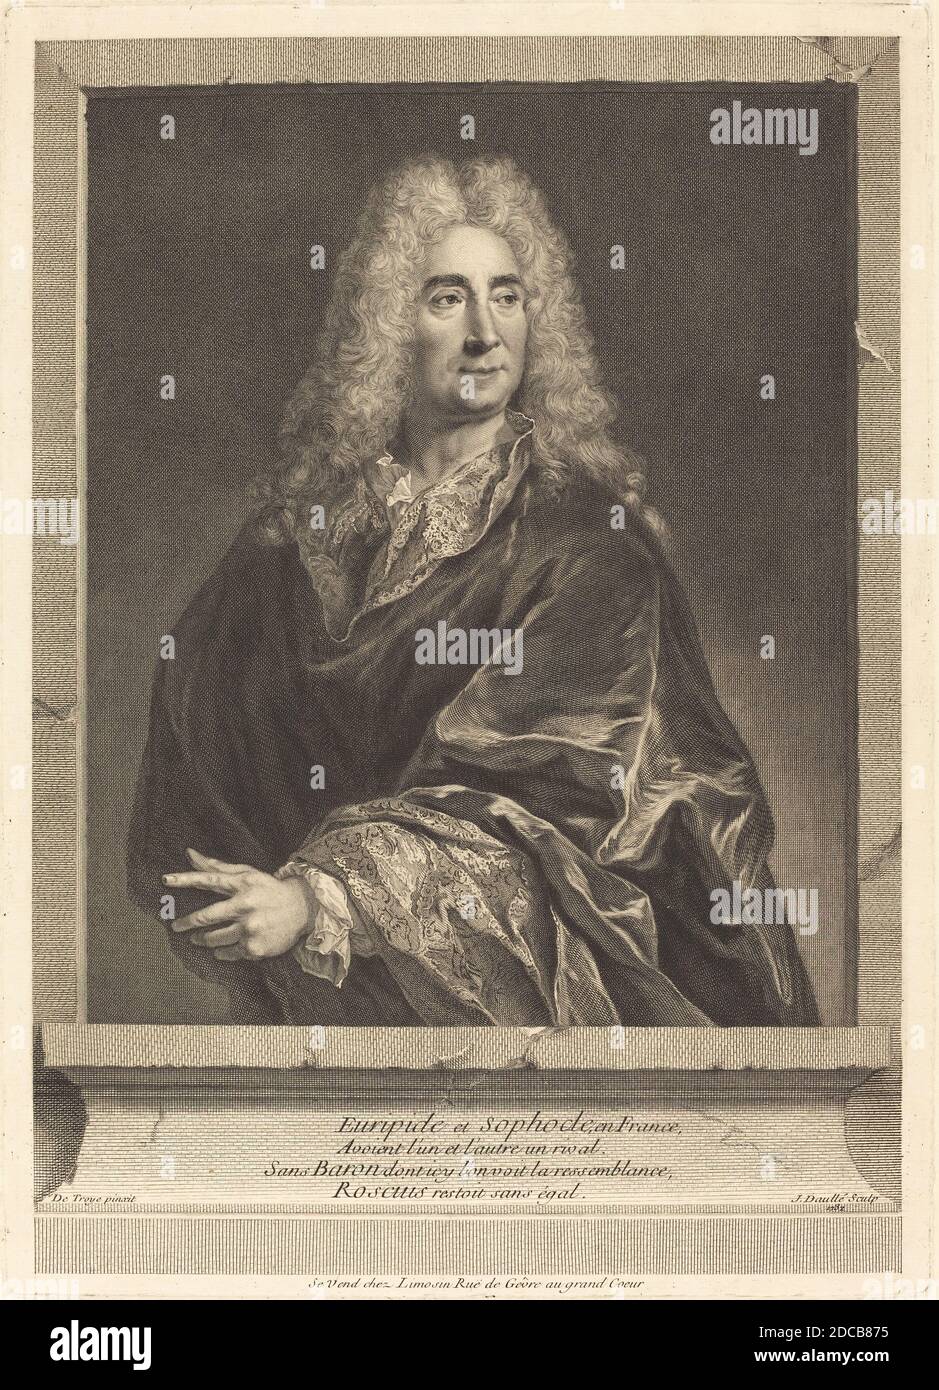 Jean Daullé, (artist), French, 1703 - 1763, François de Troy, (artist after), French, 1645 - 1730, Michel Baron, 1732, engraving on laid paper, plate: 42 x 30 cm (16 9/16 x 11 13/16 in.), sheet: 51 x 38 cm (20 1/16 x 14 15/16 in Stock Photo